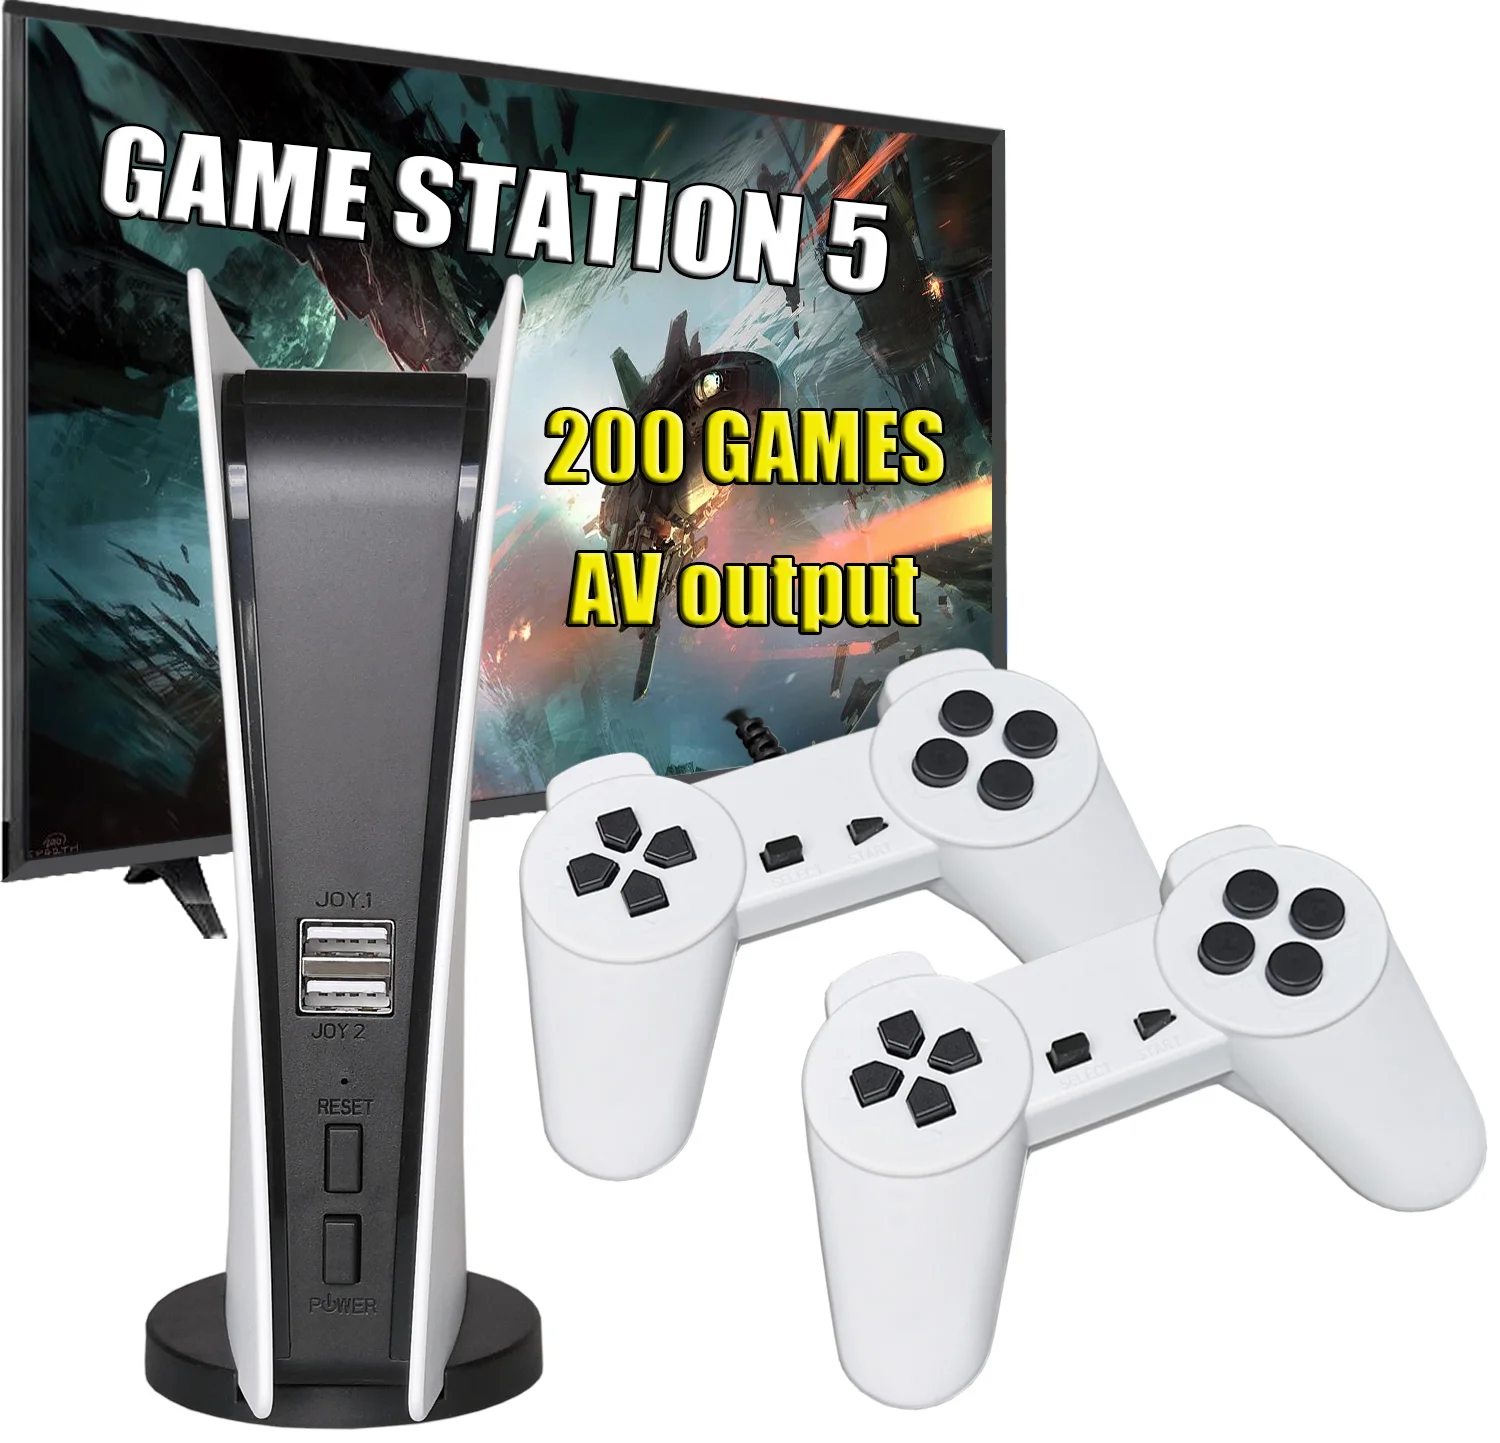 

GS5 Game Station 5 Console TV Video Game Consola AV Output USB Wired Controller 200 Retro Games In Handheld Gaming Players